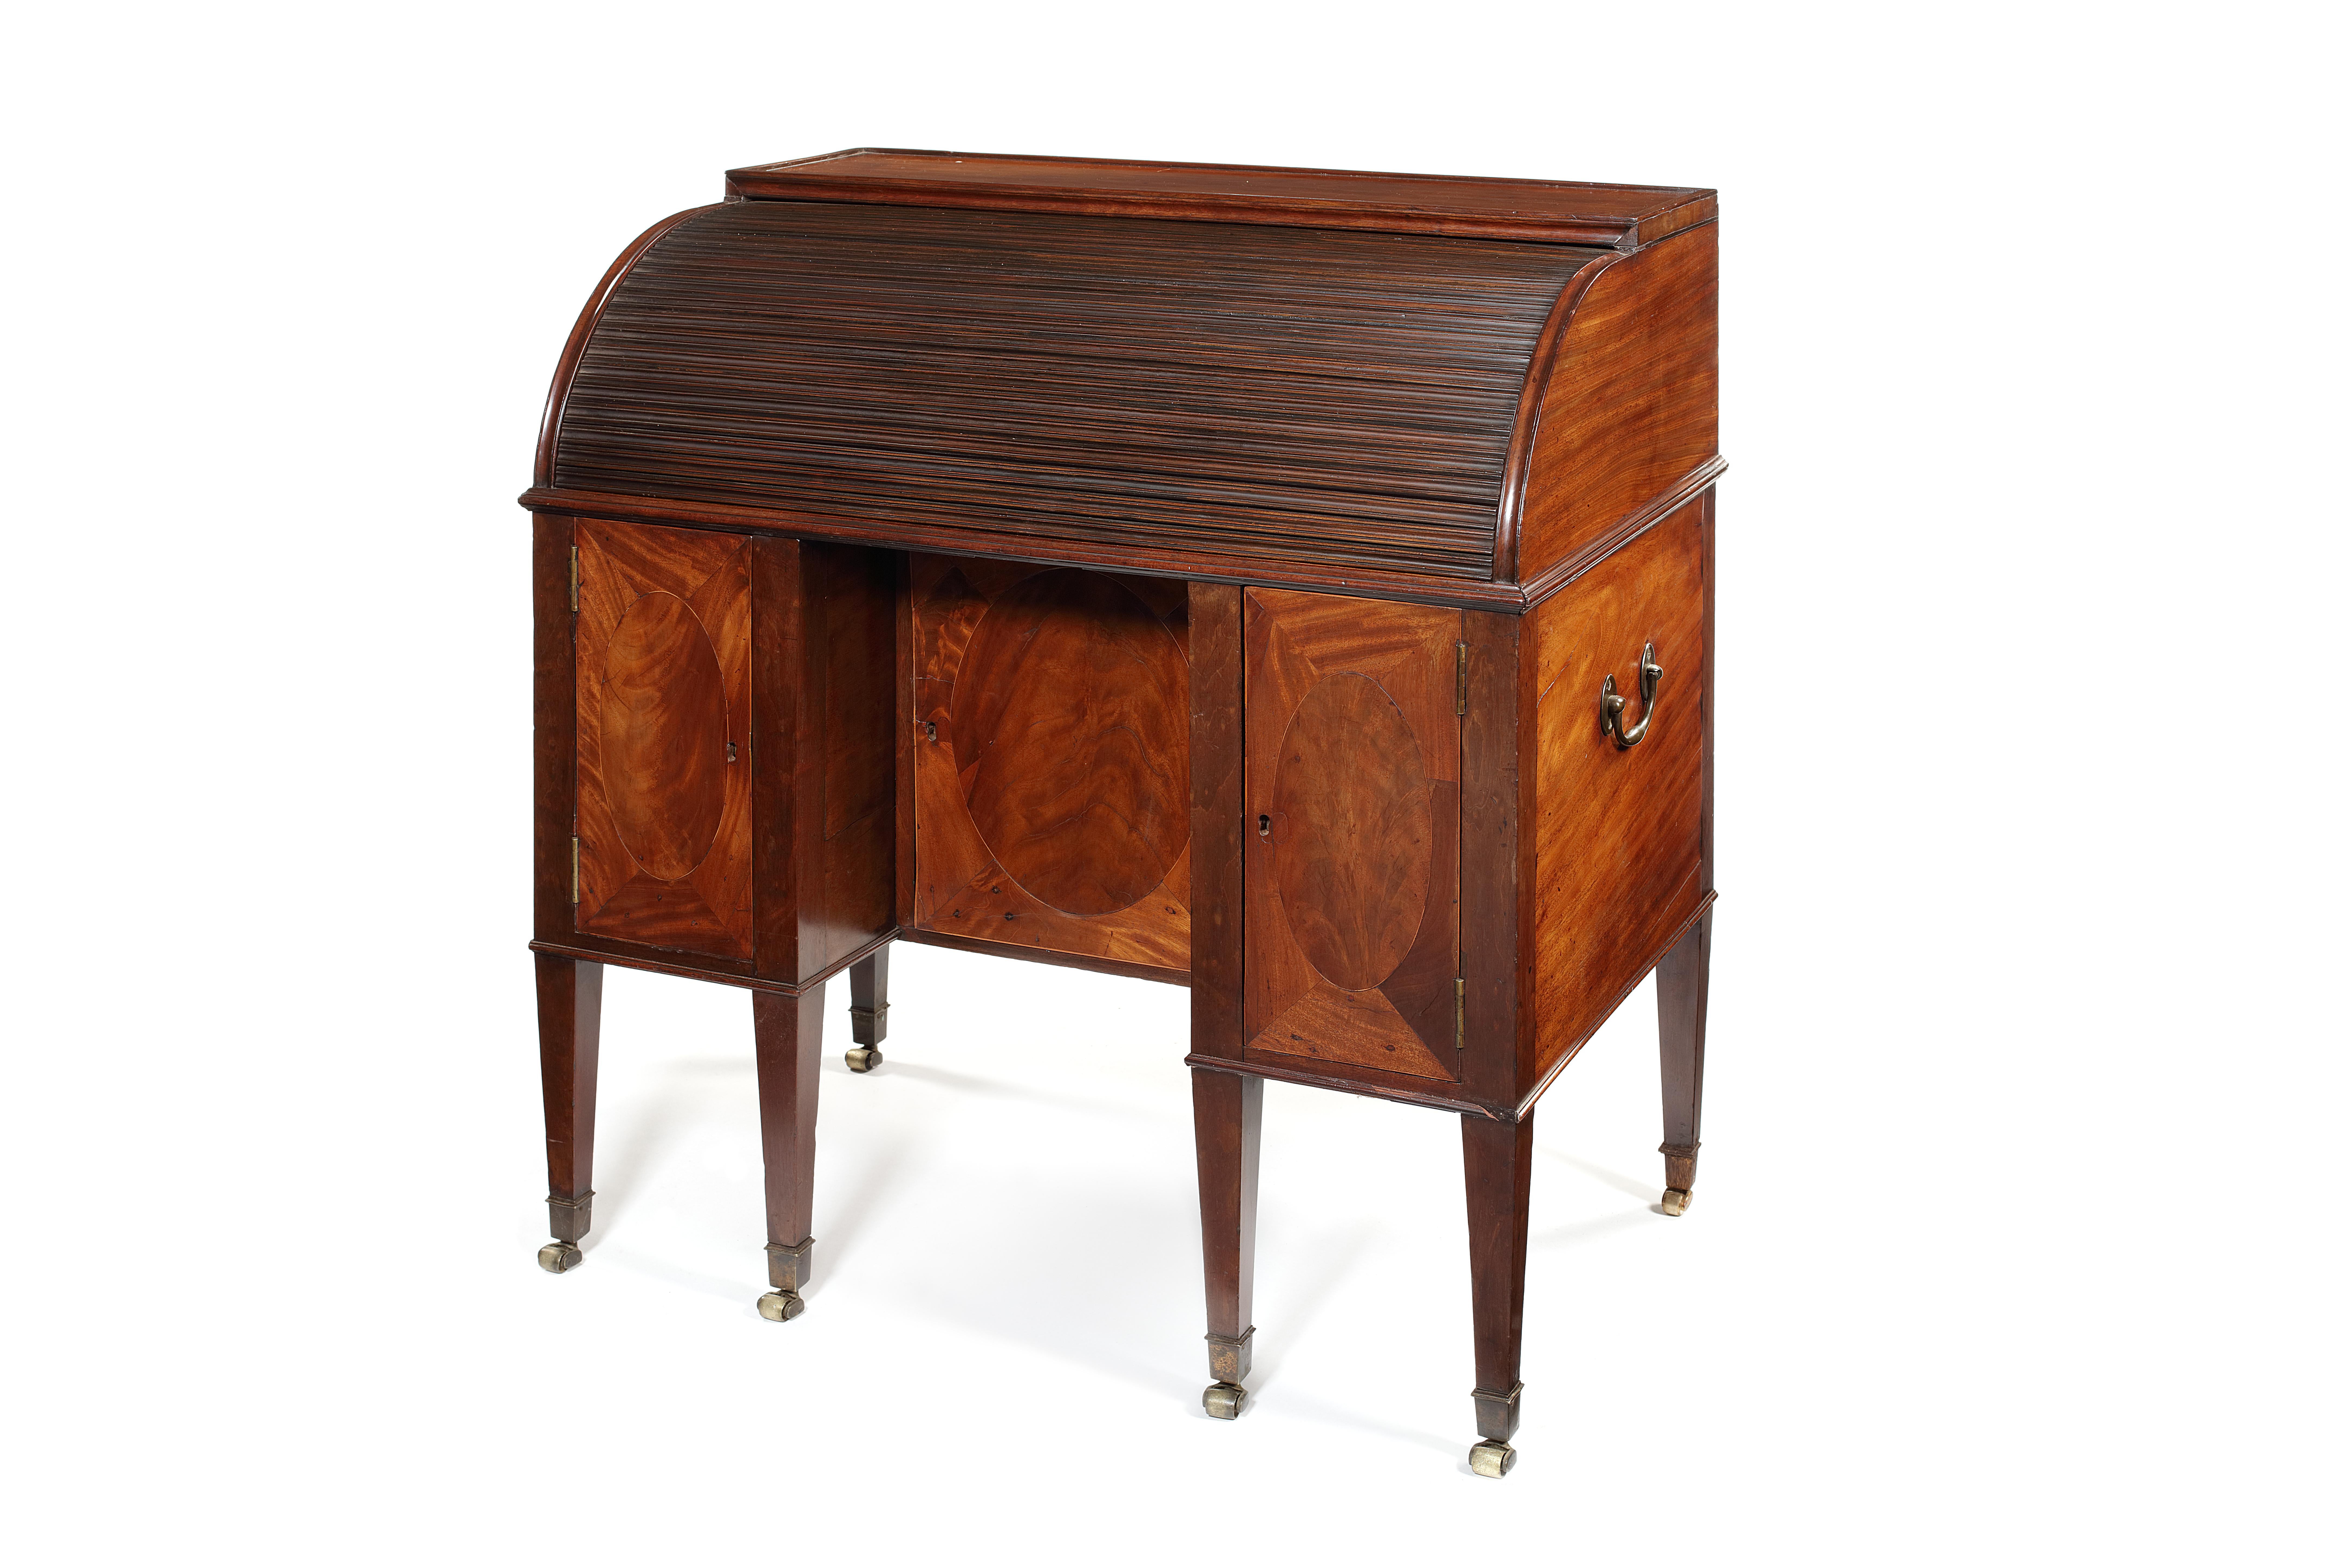 A late George III mahogany tambour desk
Inlaid with boxwood and ebonized lines, the rectangular paneled top above a tambour, enclosing a later red leather tooled writing surface, six slender pigeonholes, six pigeonholes and four short drawers above